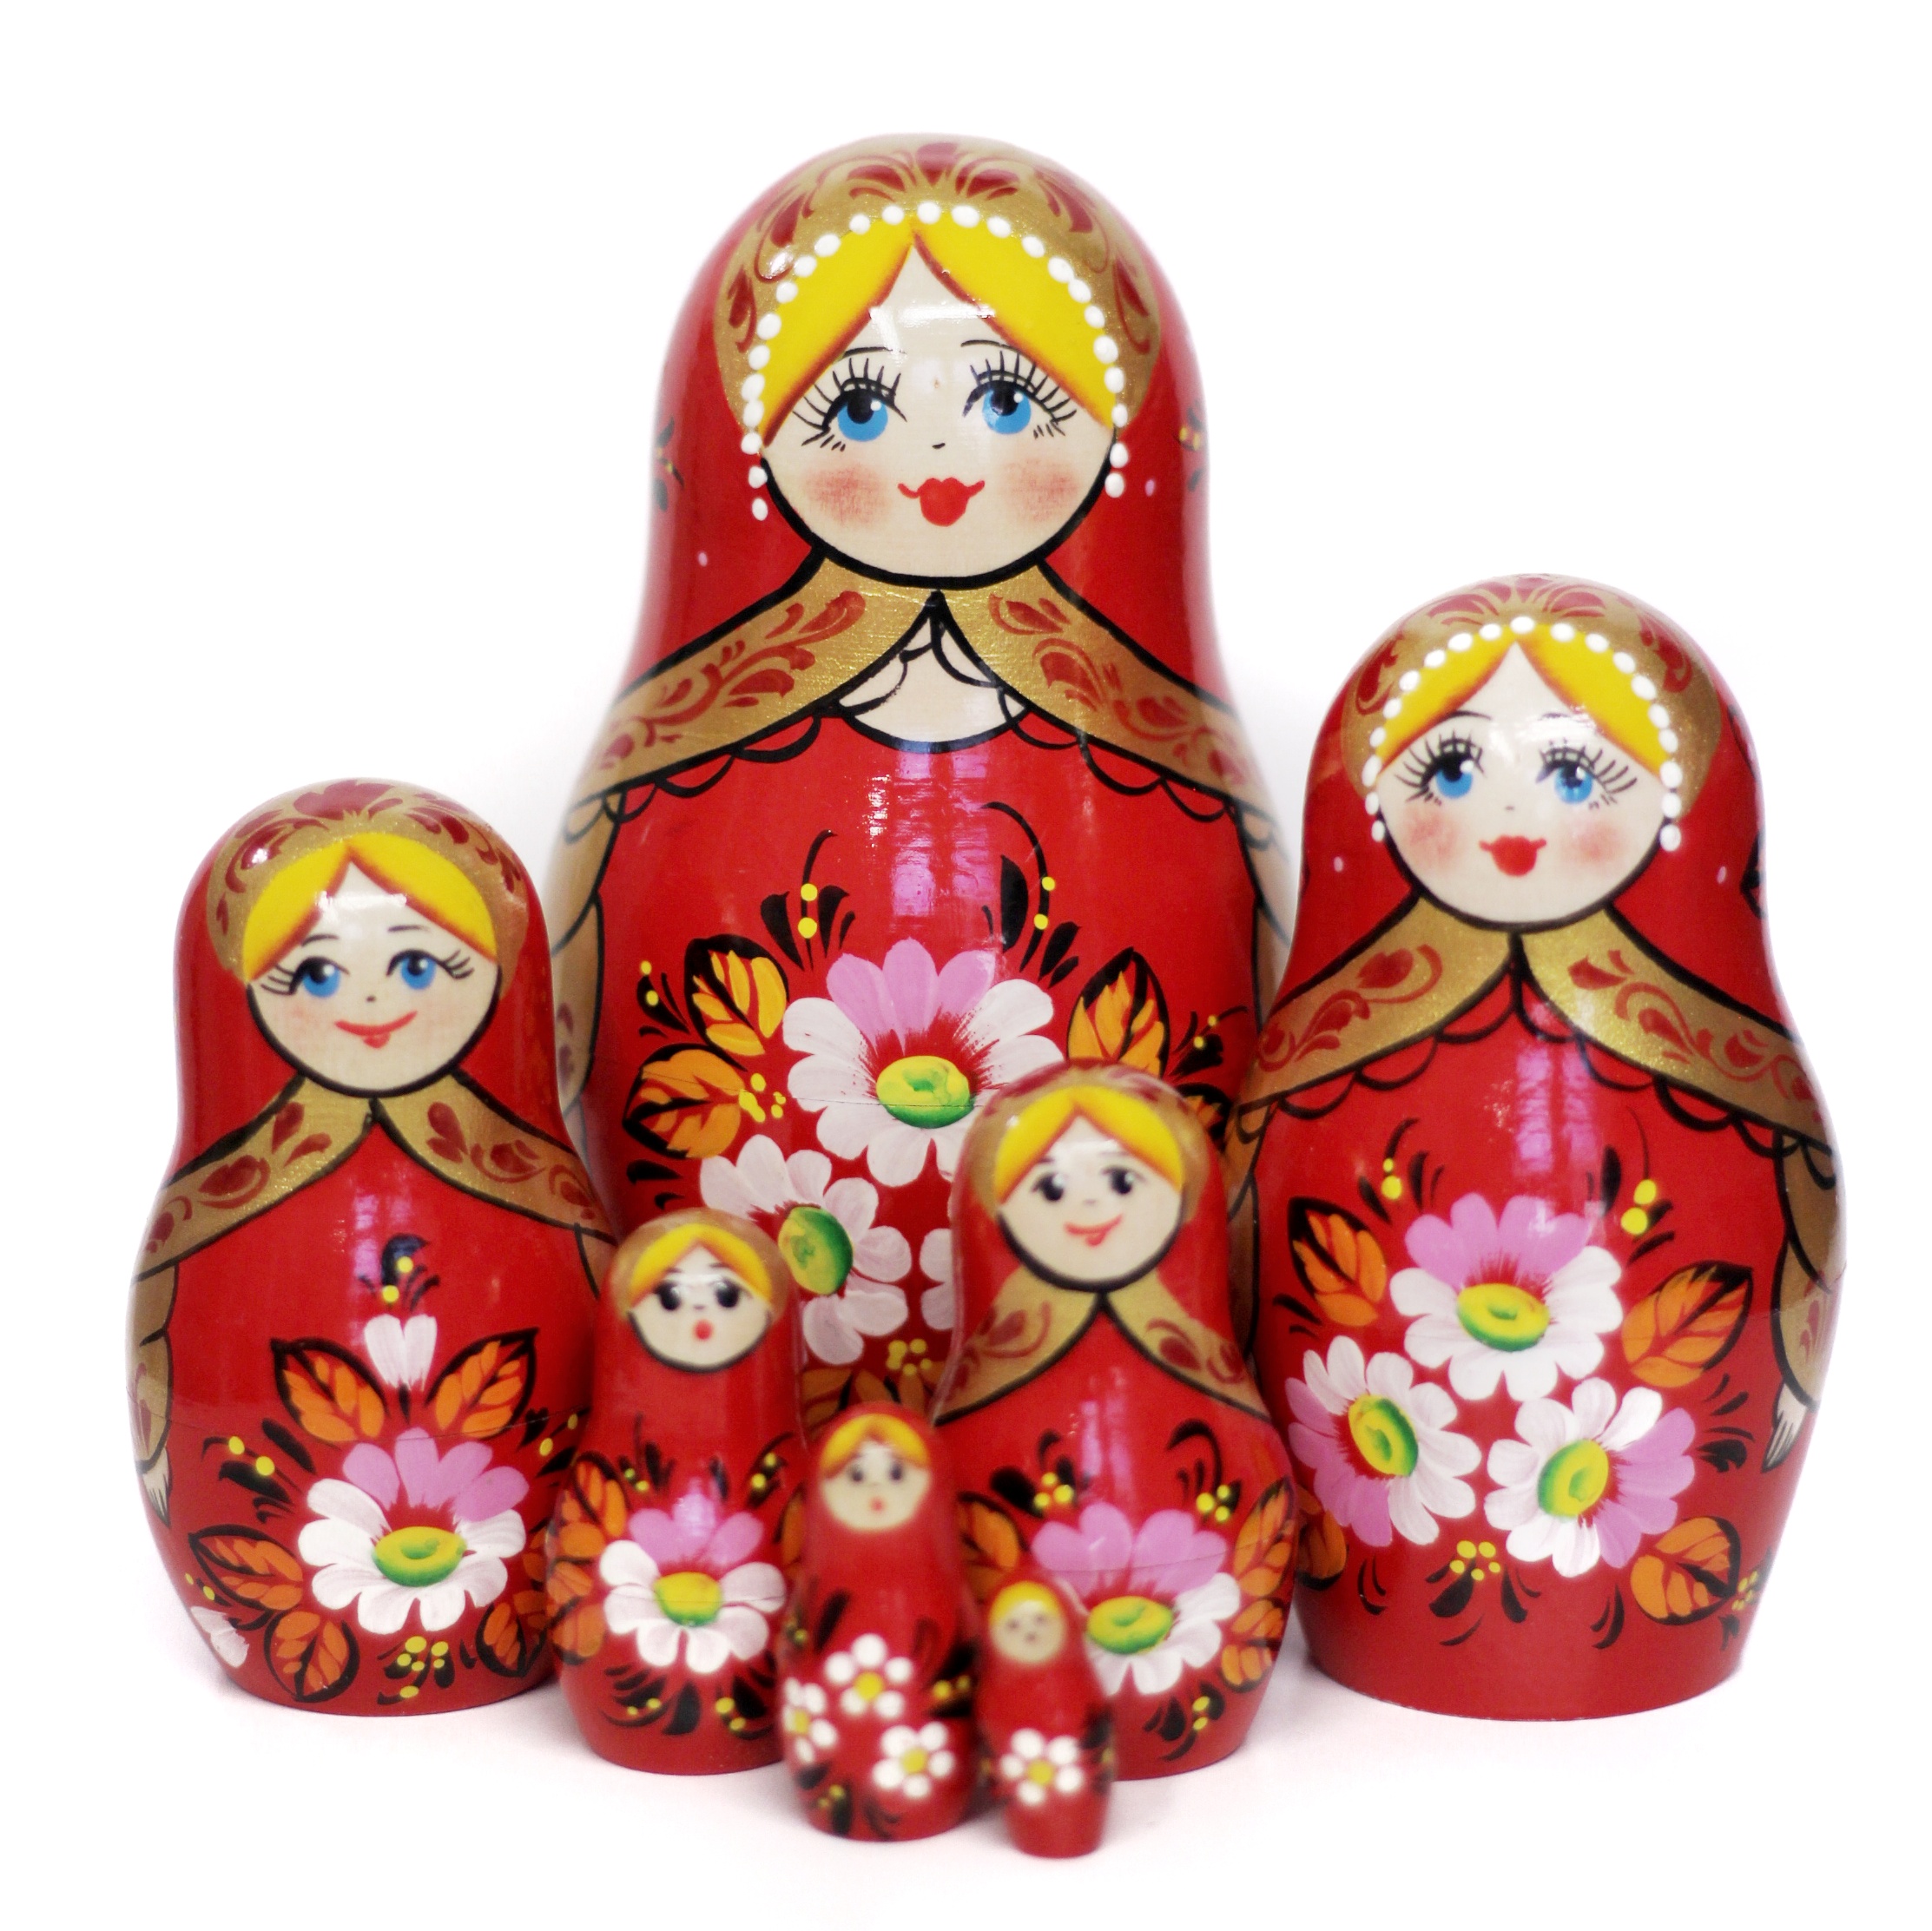 A 5 Nested set of Artists Matryoshka, Red Girl with 3 white/pink flowers